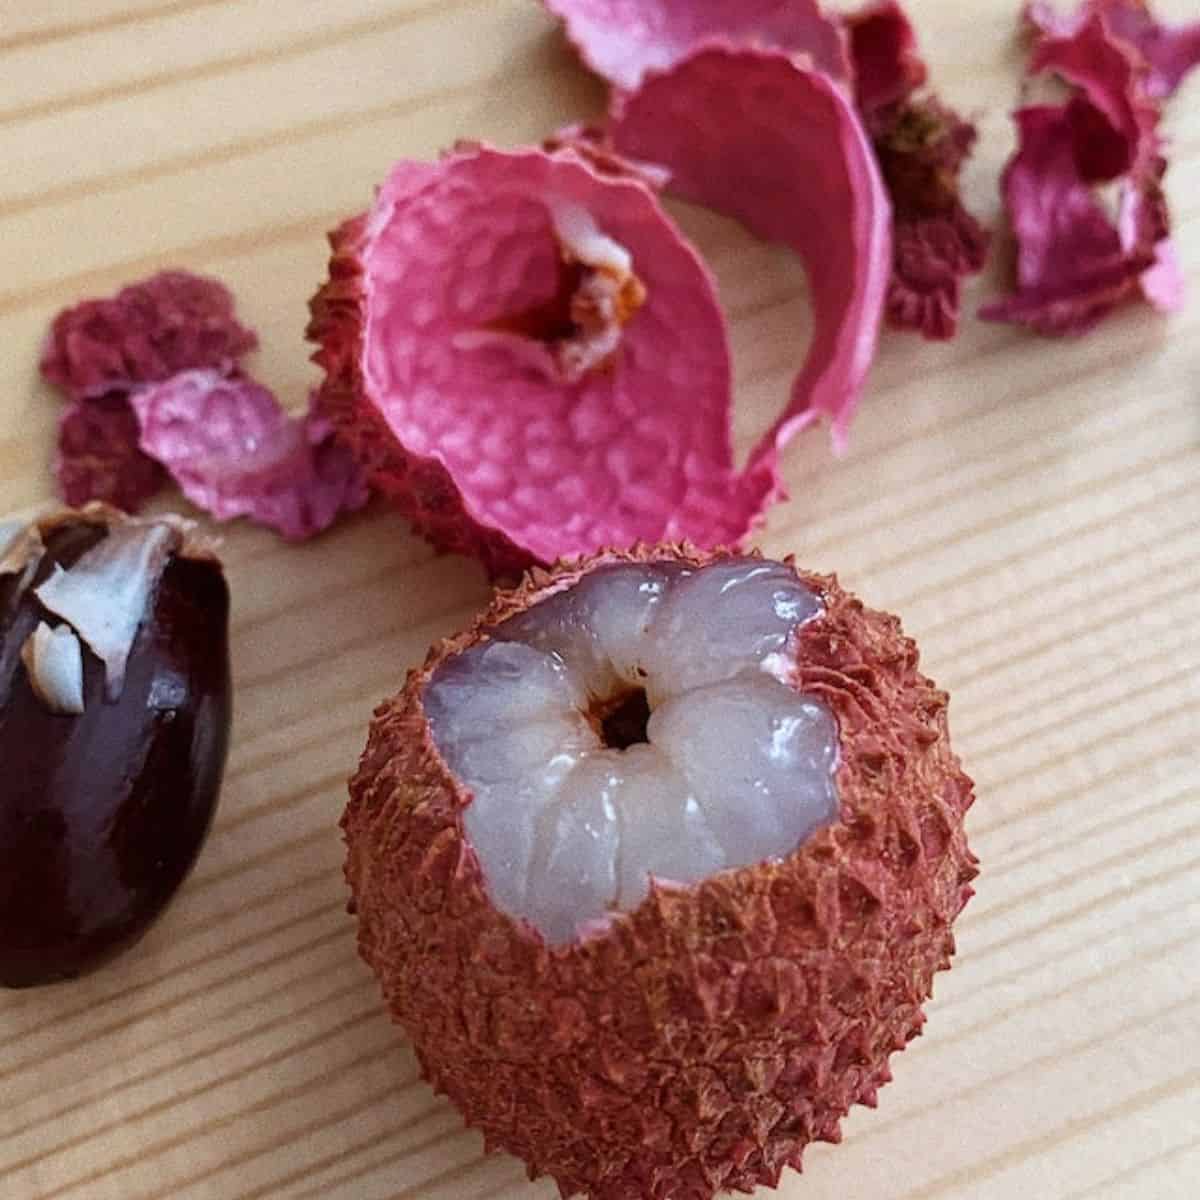  Lychee fruit to be used in a jelly recipe